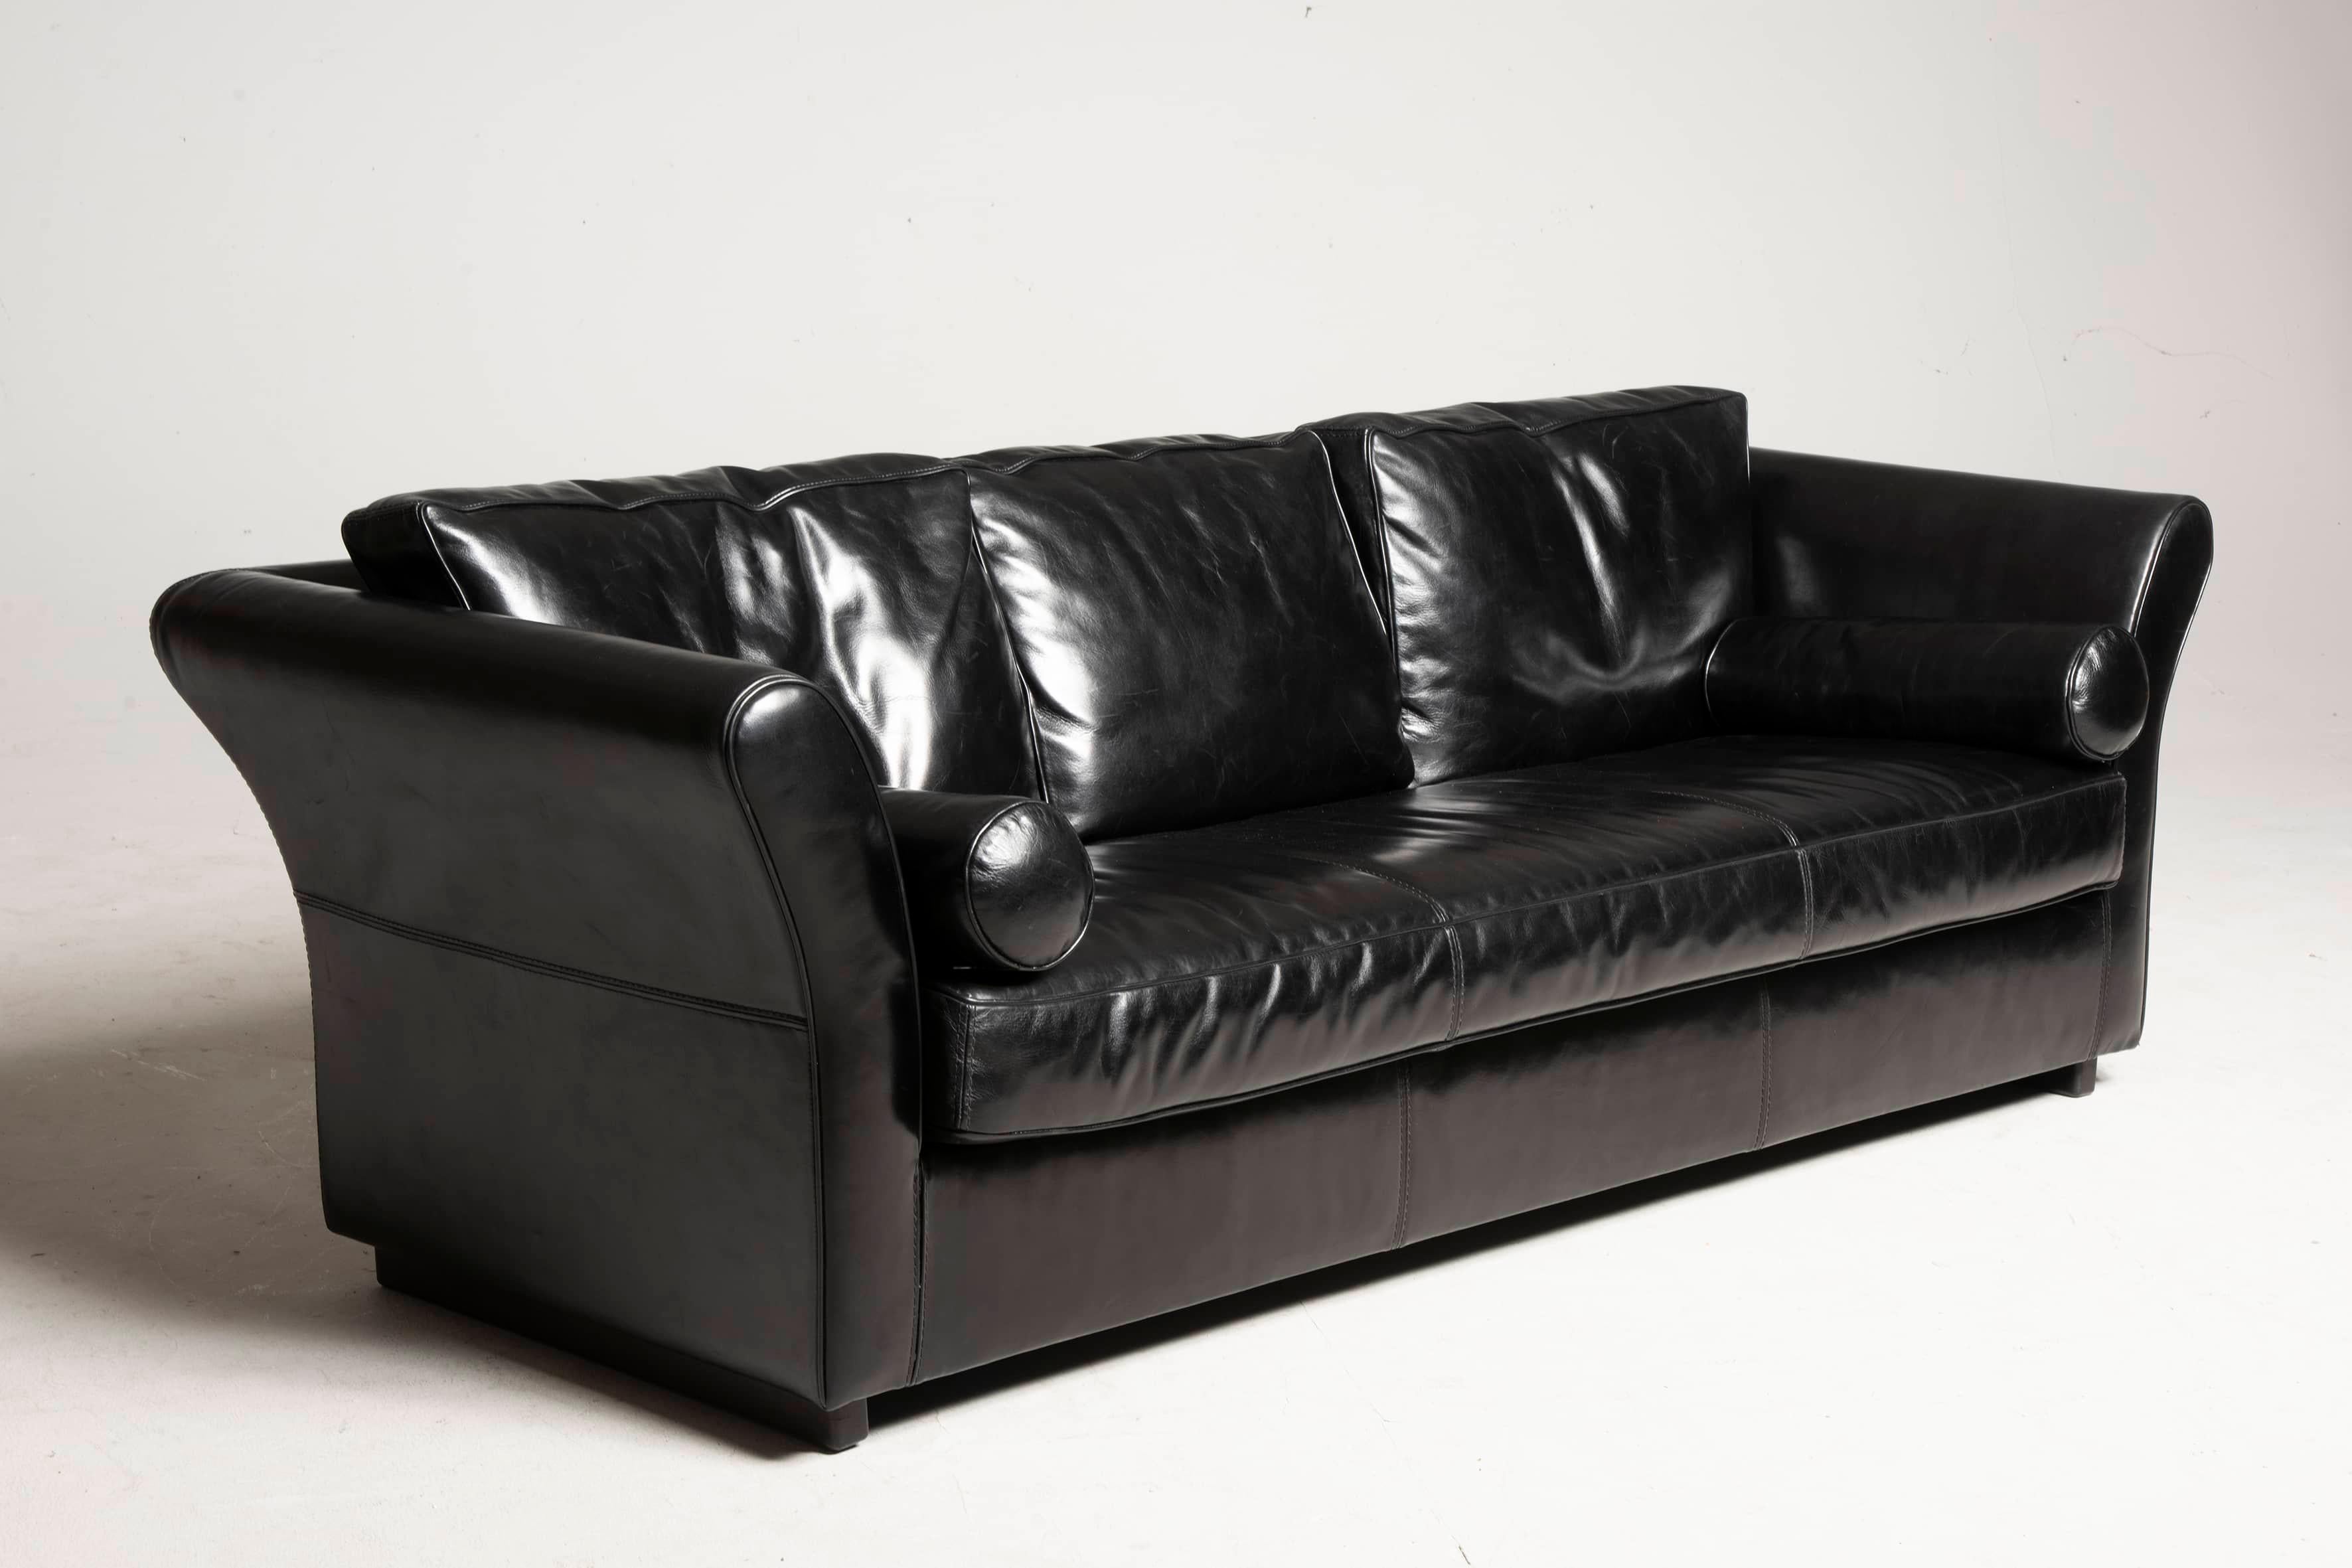 Baxter sofa 2000s used but in perfect condition ( no cuts or tears in the leather) Model Diner. The sofa is in glossy black leather. The two cushions are included in the price. It welcomes three seaters. Size 230 cm x 97 cm , h 68 cm.